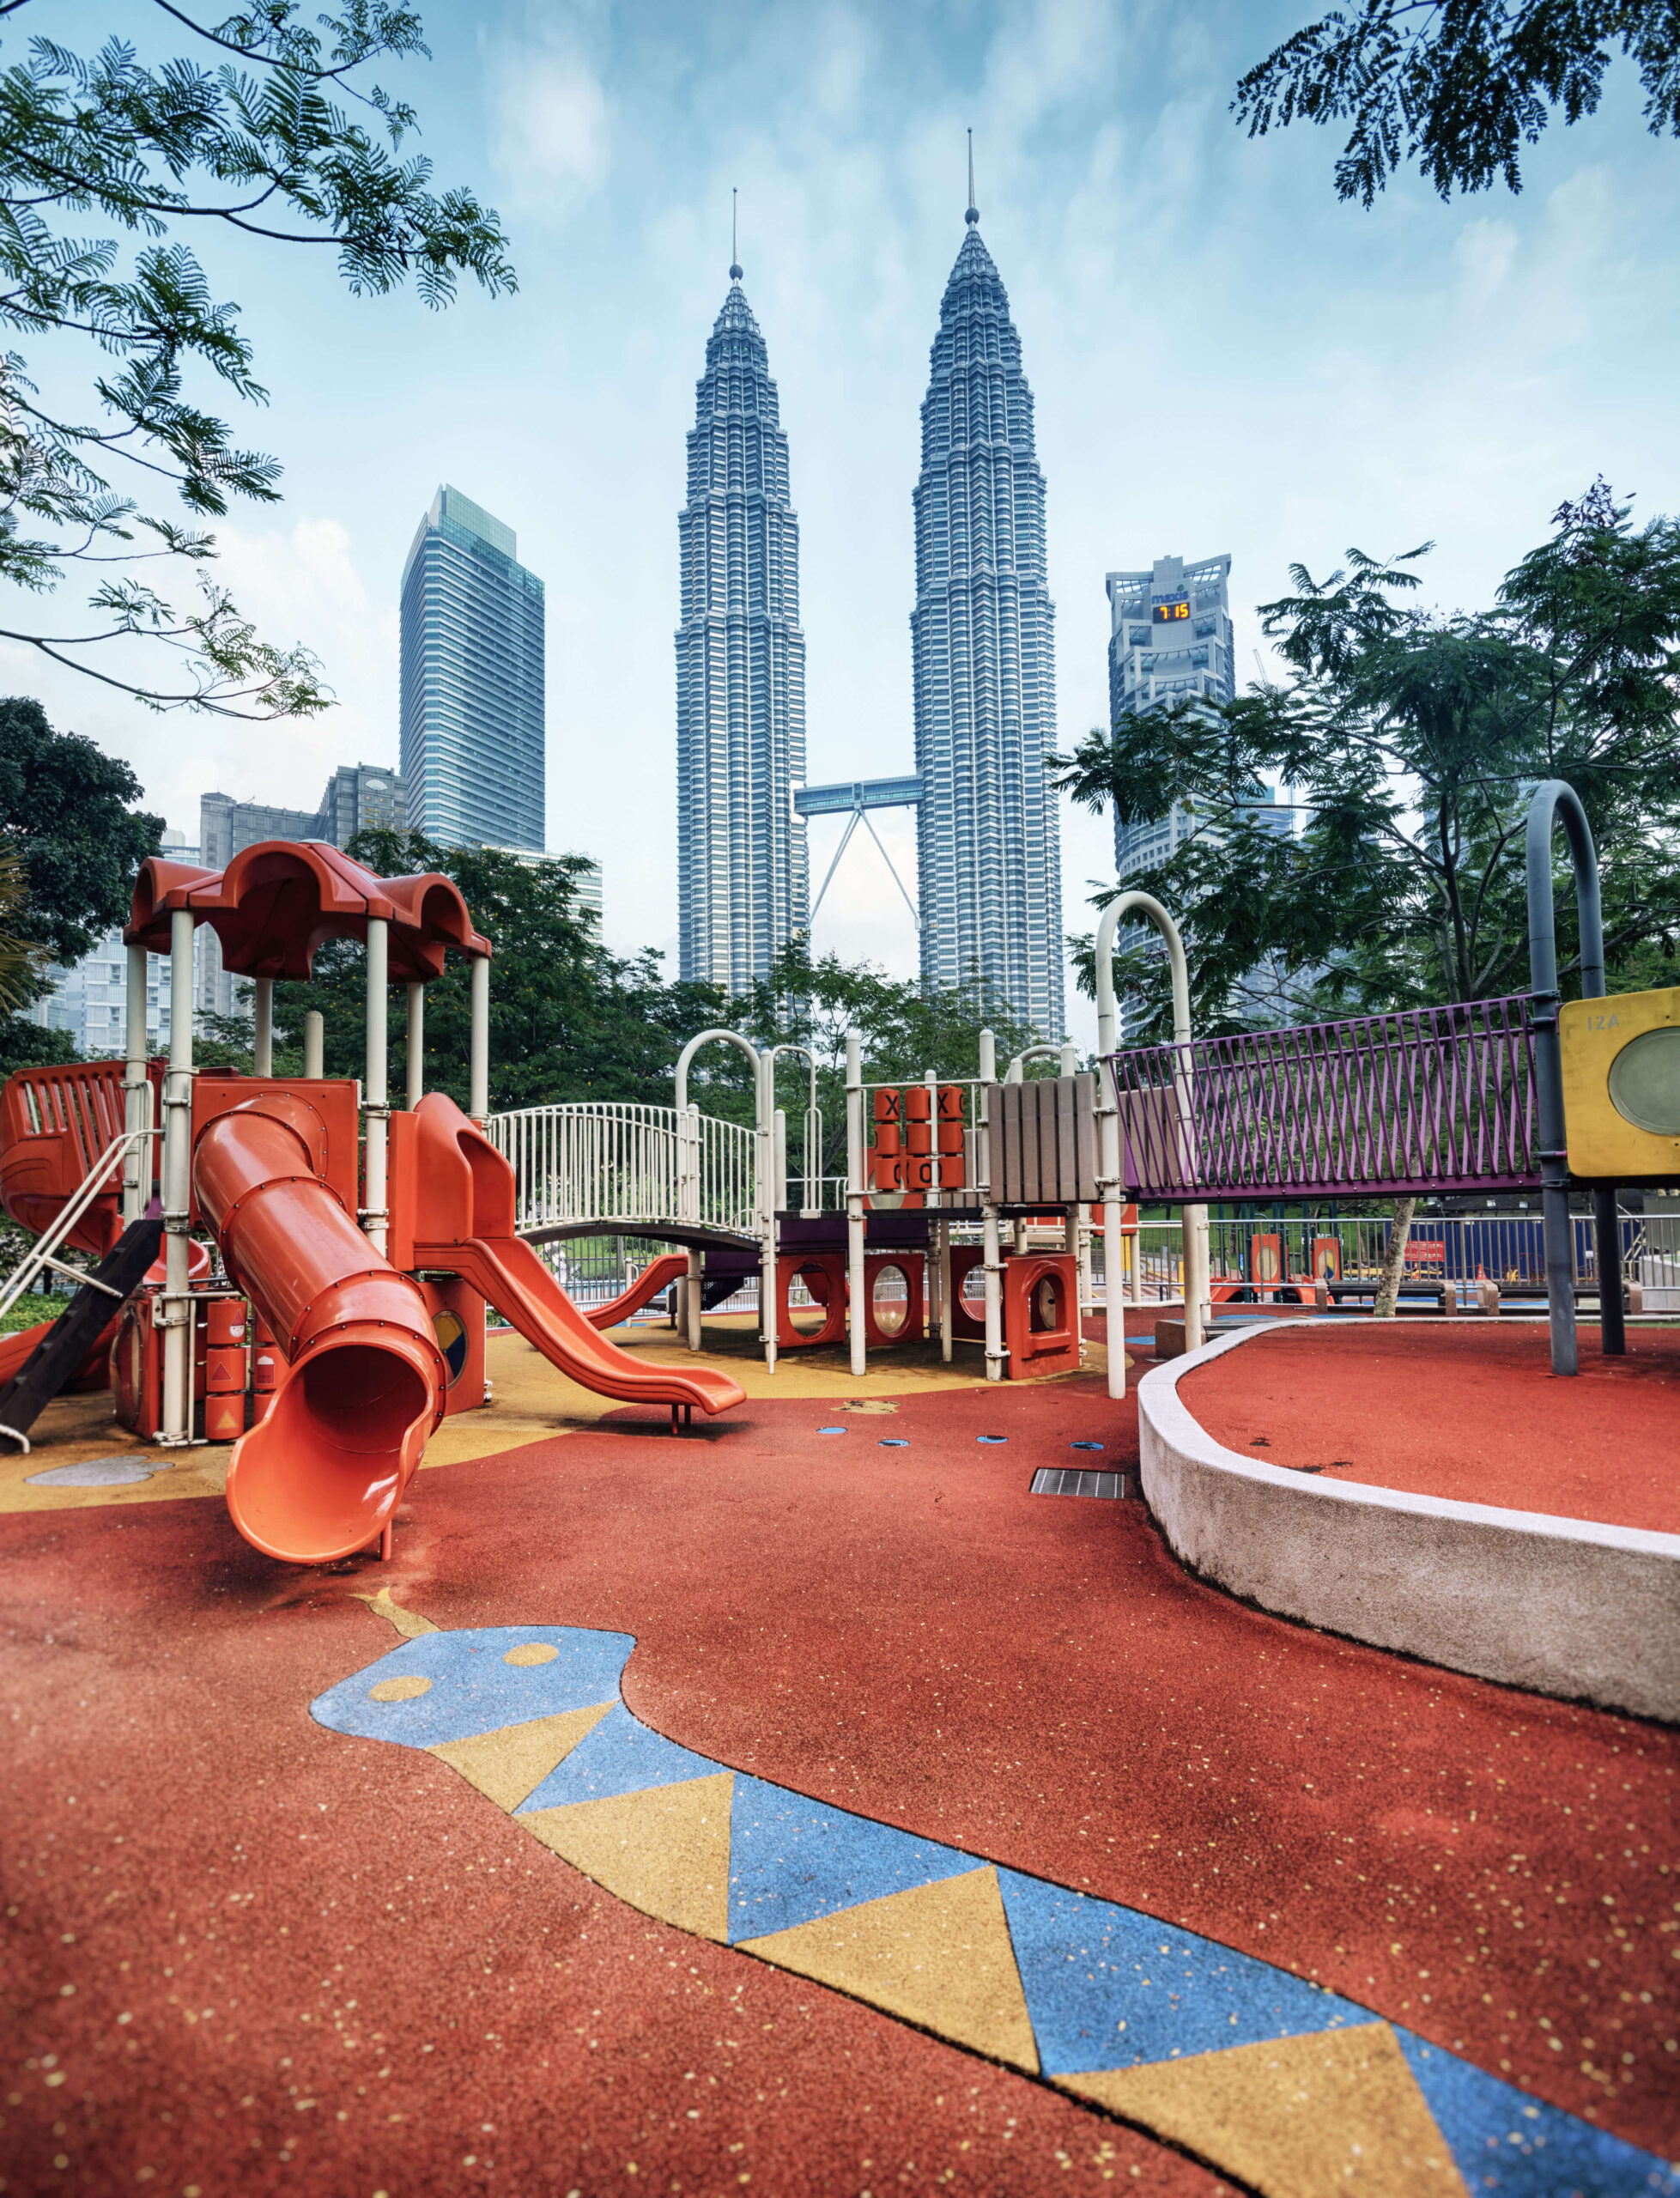 Playgrounds for families